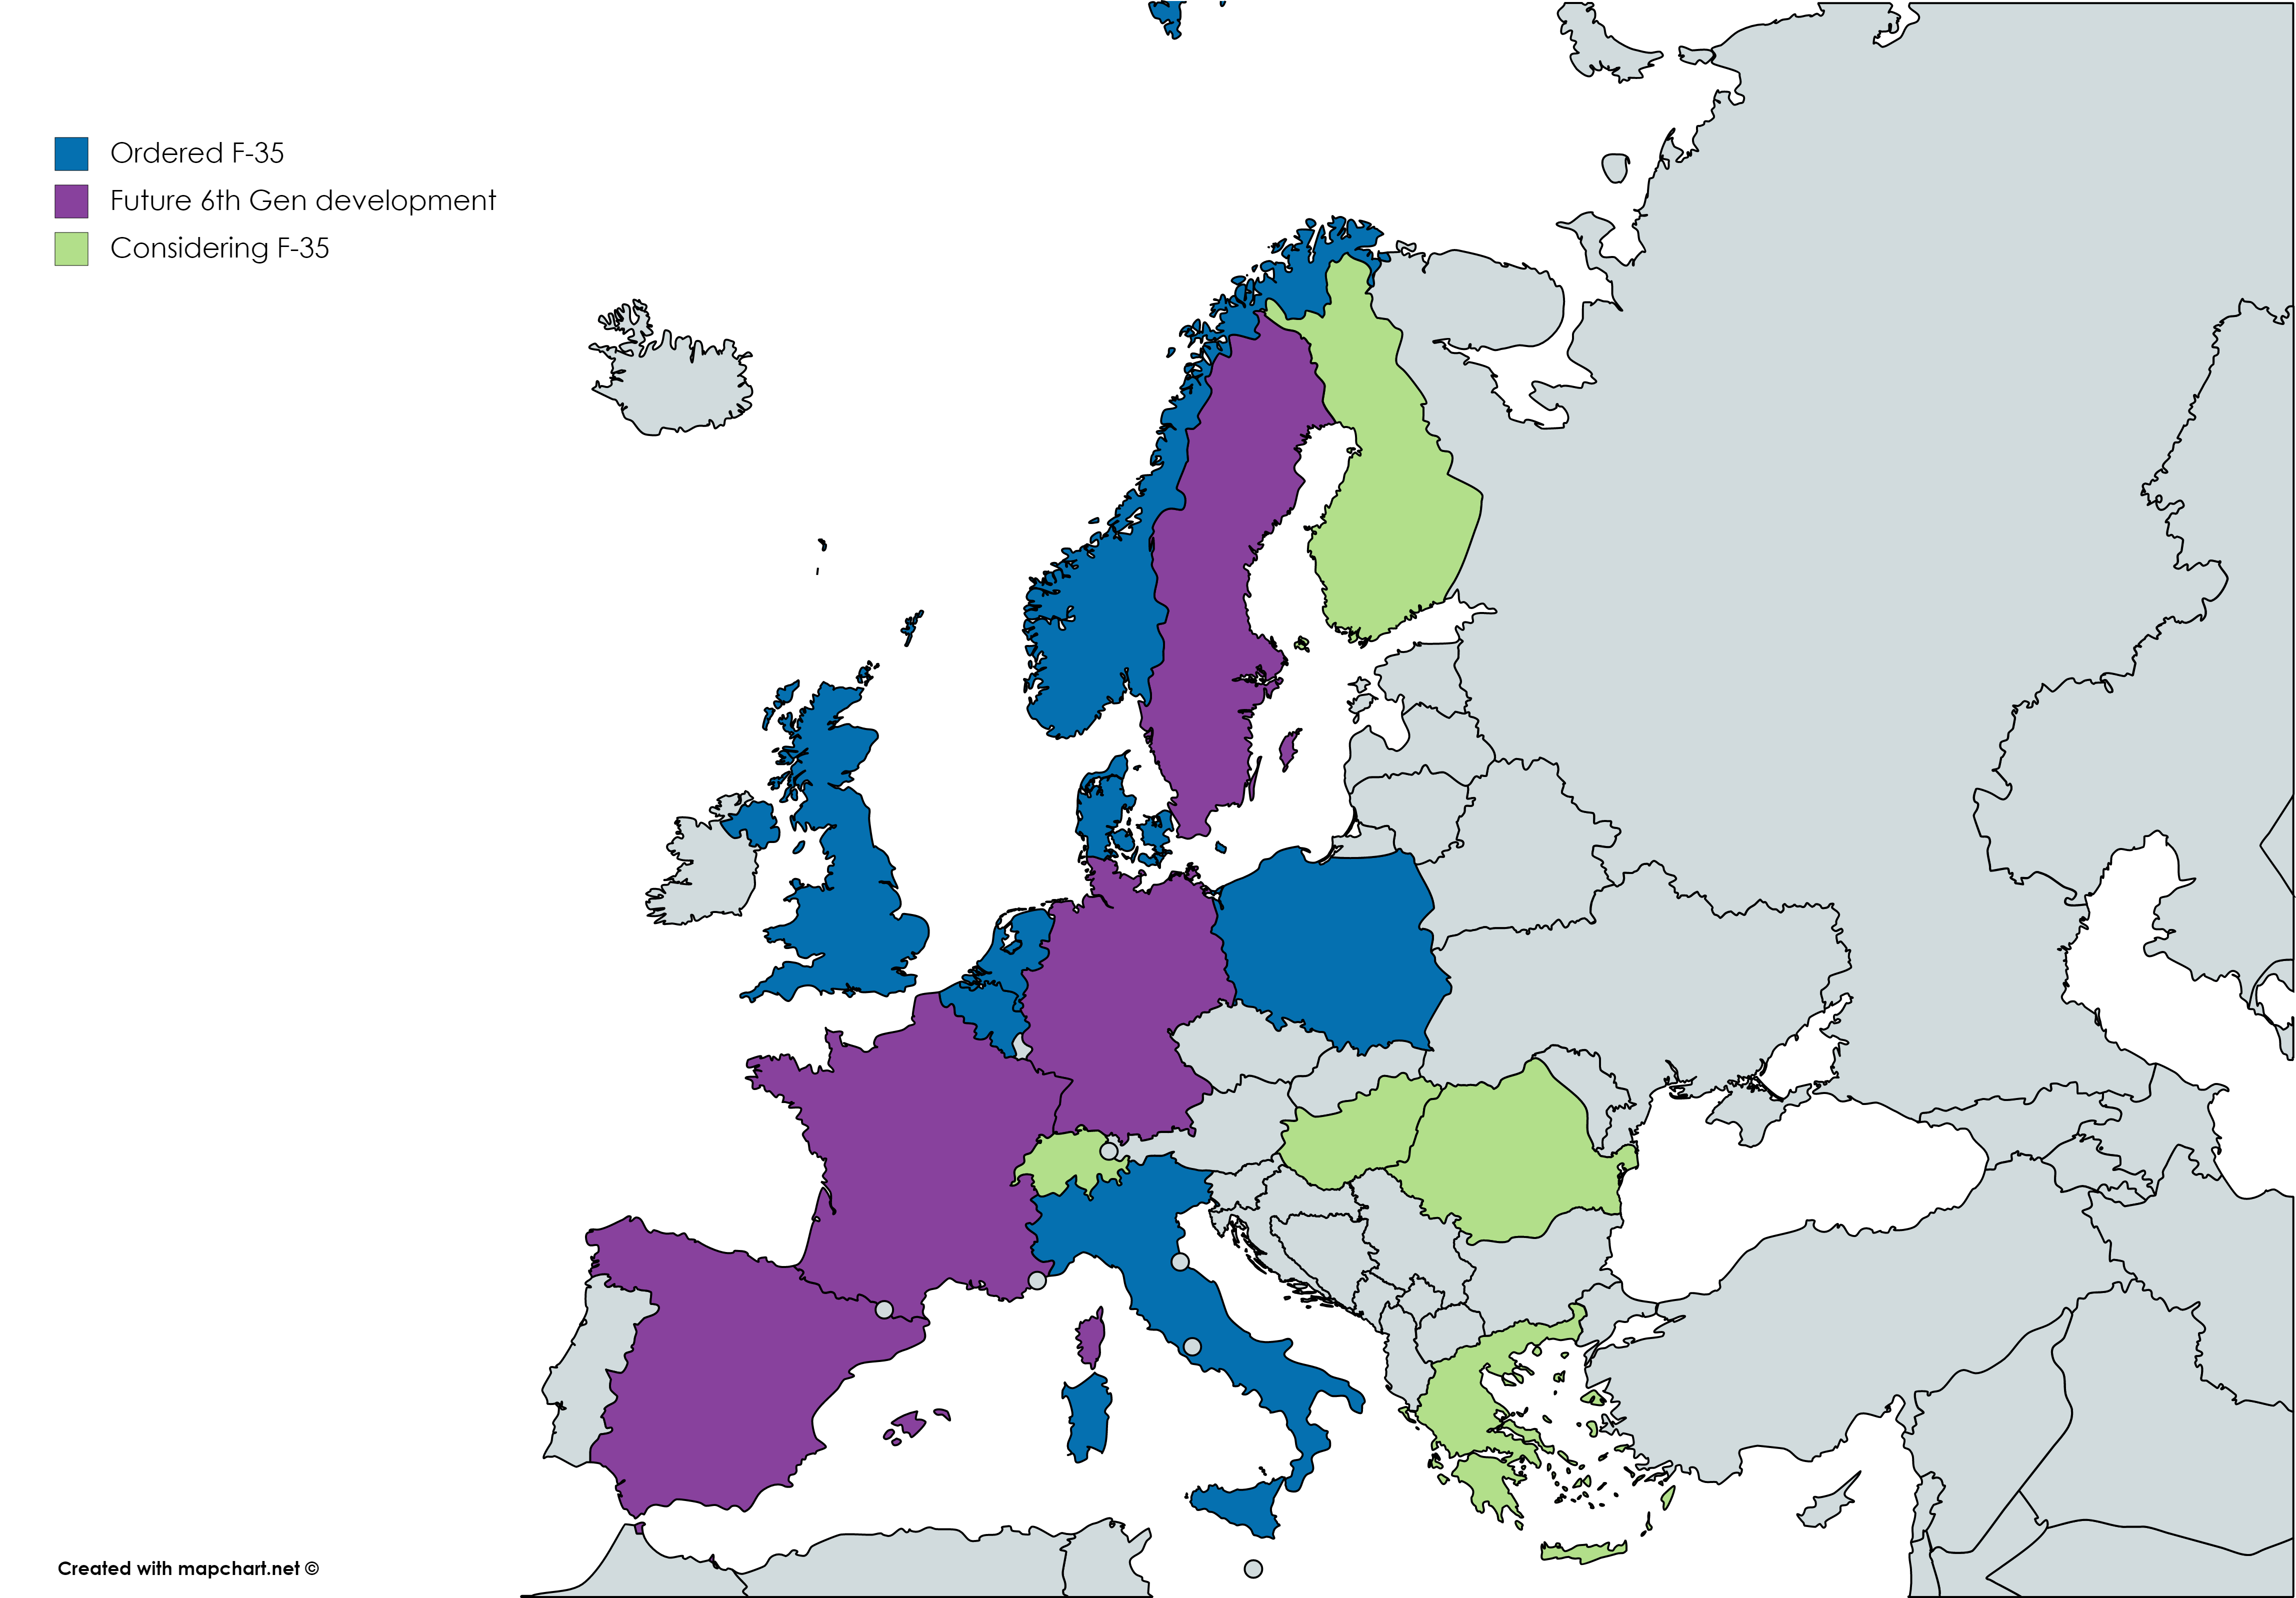 Map of Europe, fighter aircraft acquisition. © Mapchart.net